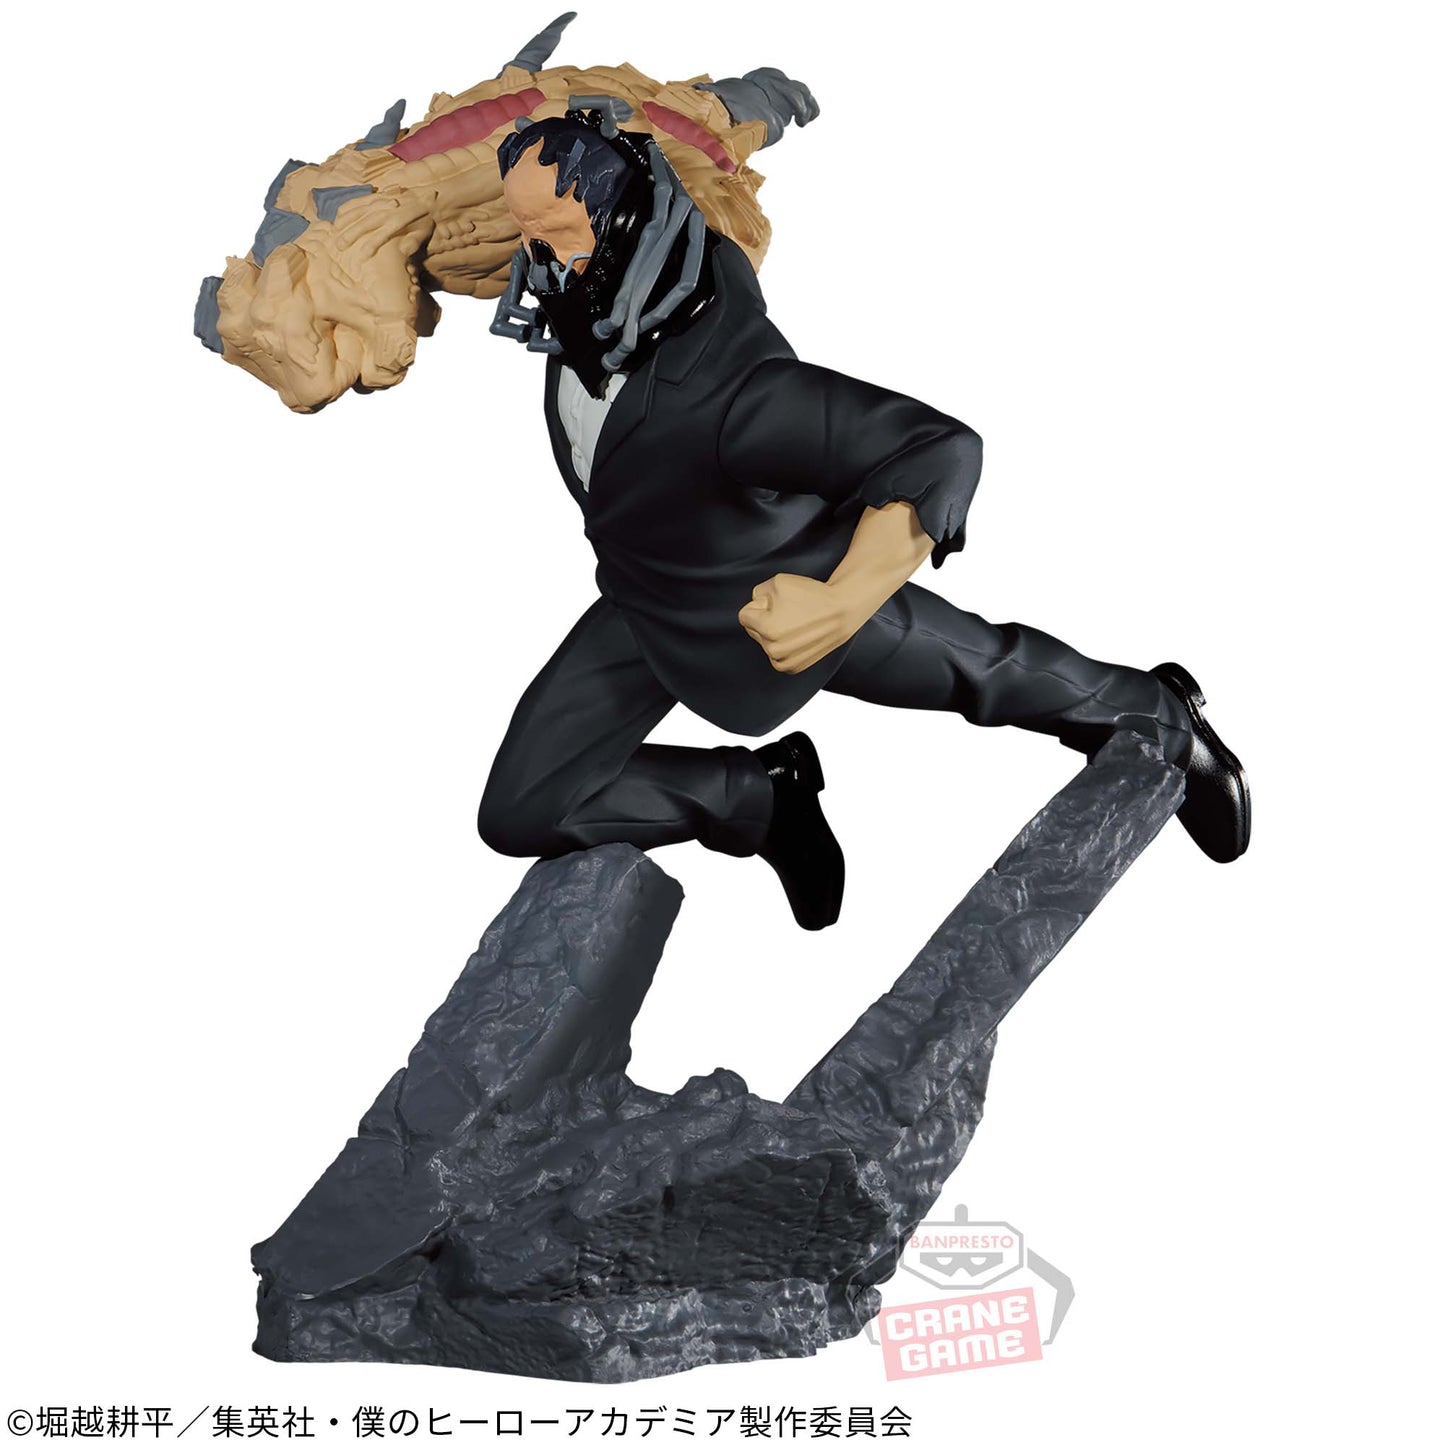 Figurine All Might Vs All For One Combination Battle My Hero Academia Combo Set